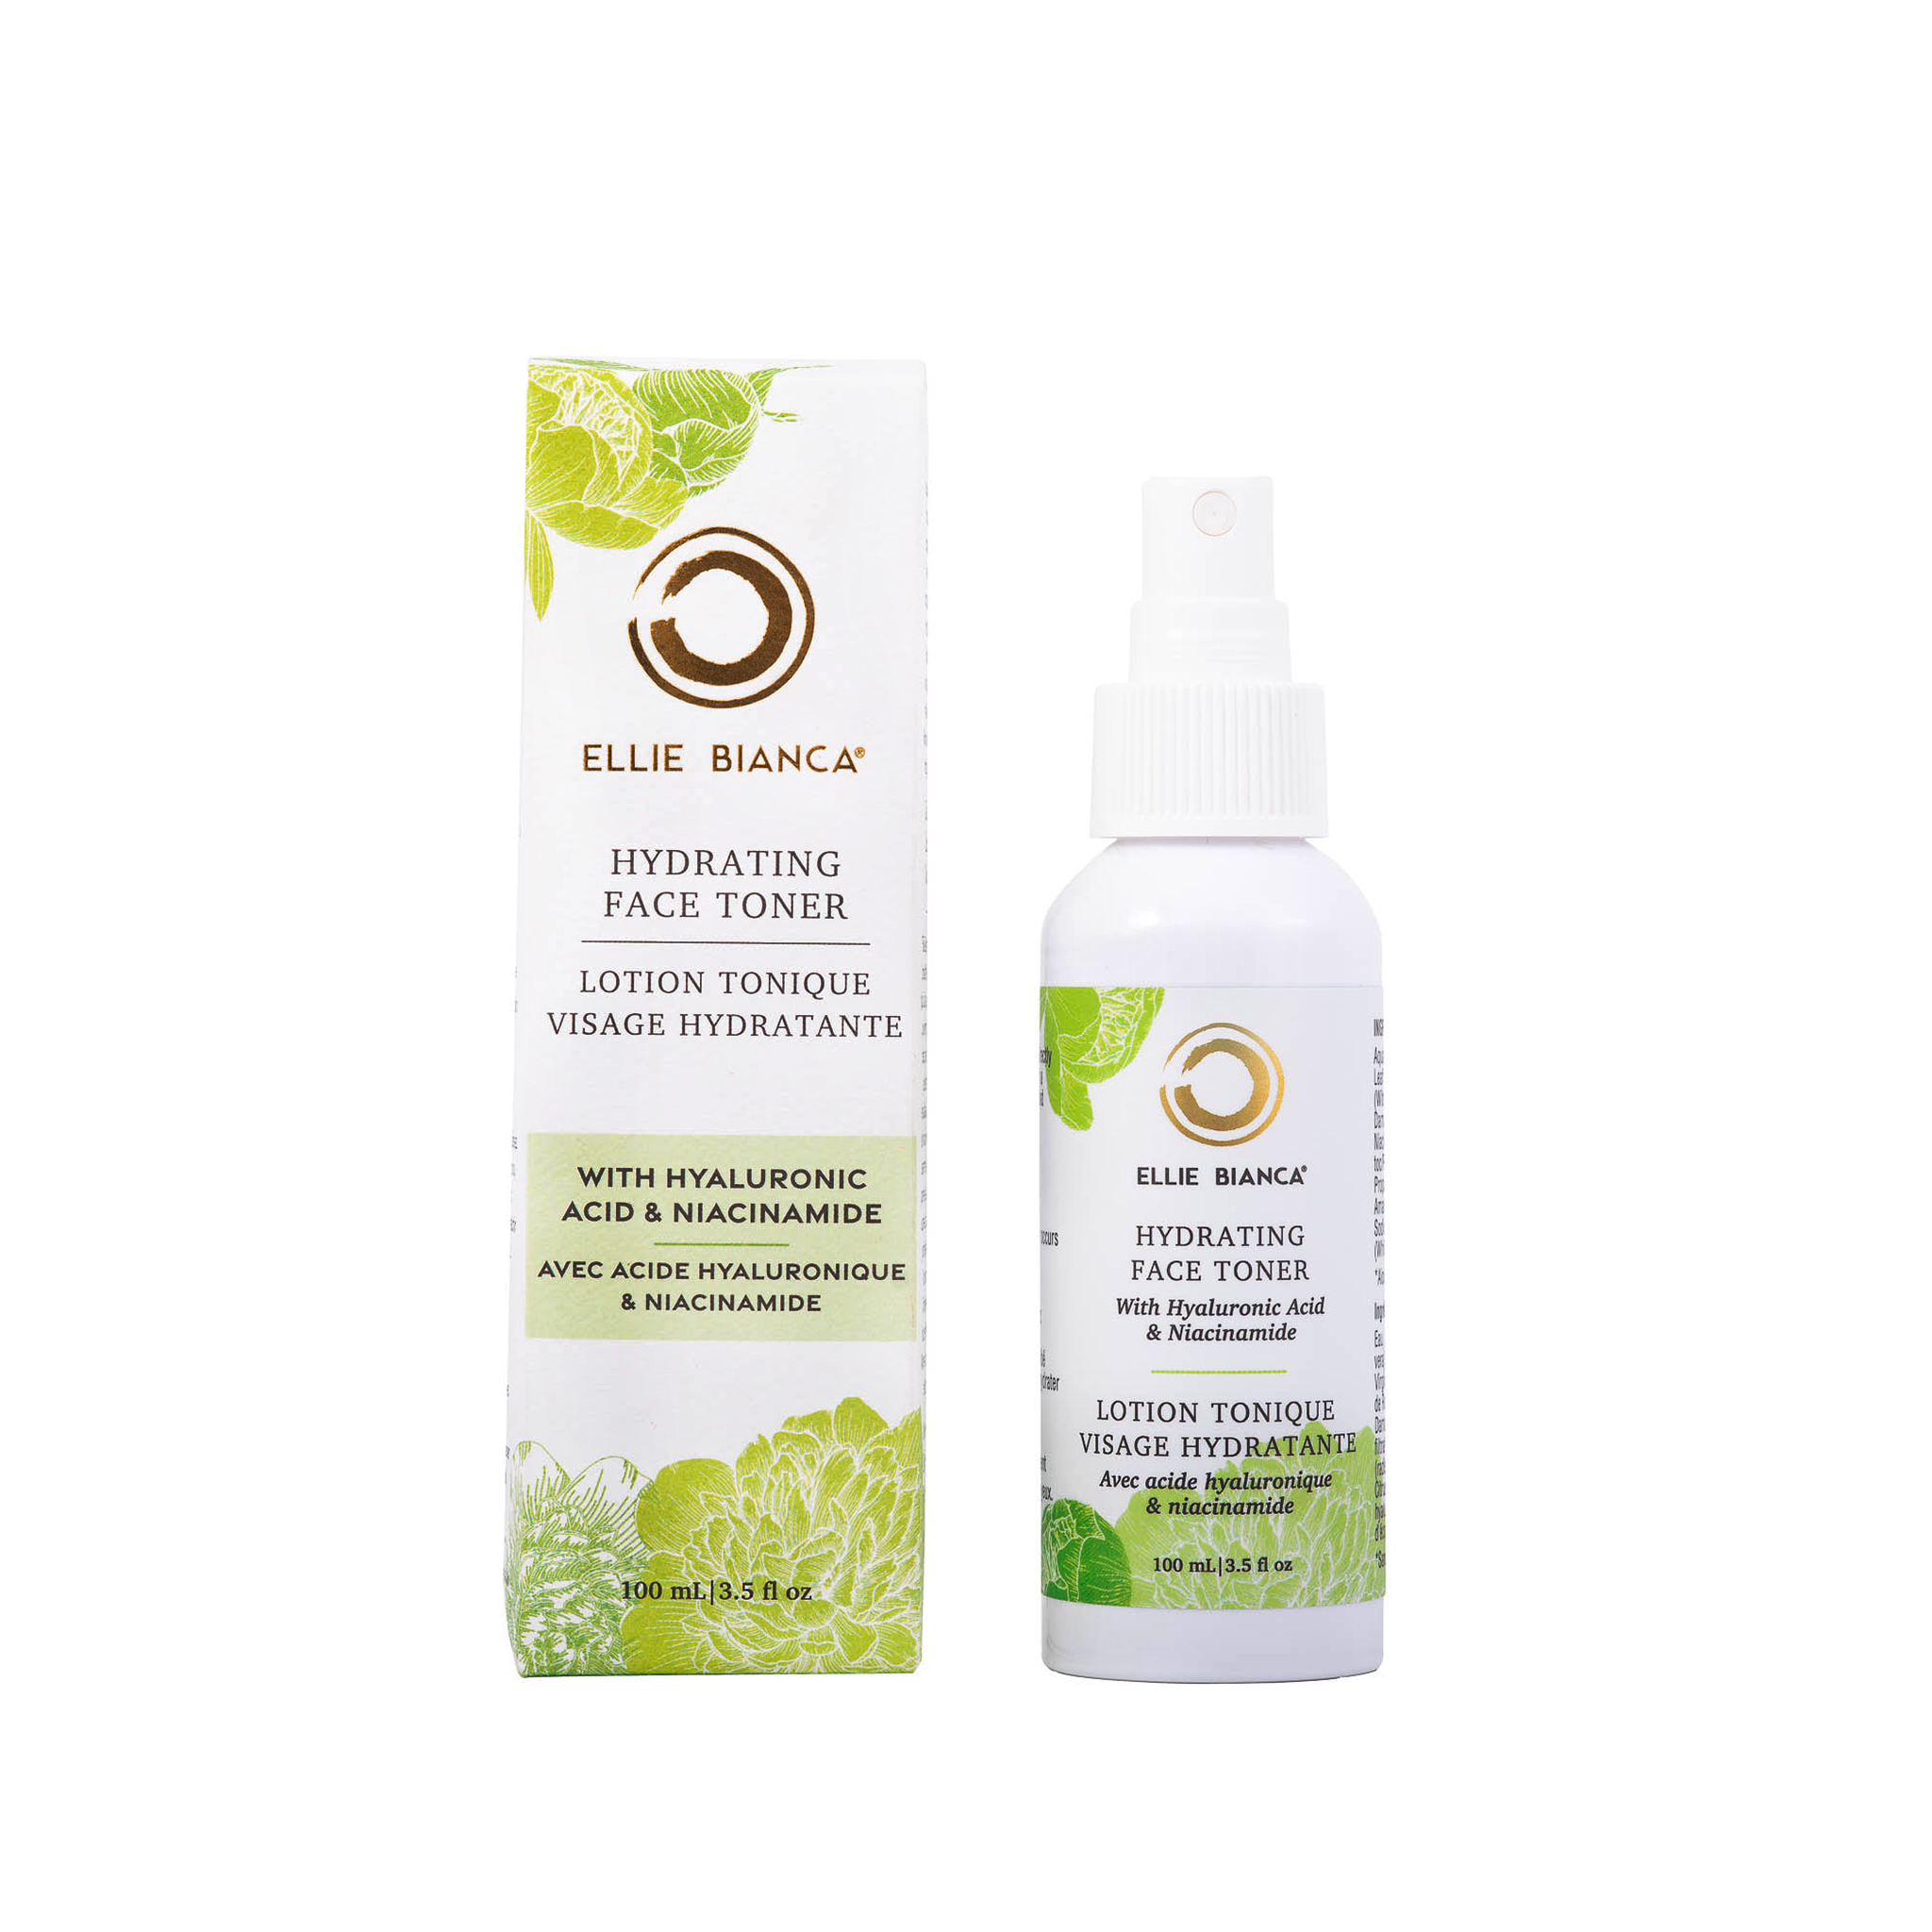 Hydrating Face Toner with Hyaluronic Acid and Niacinamide